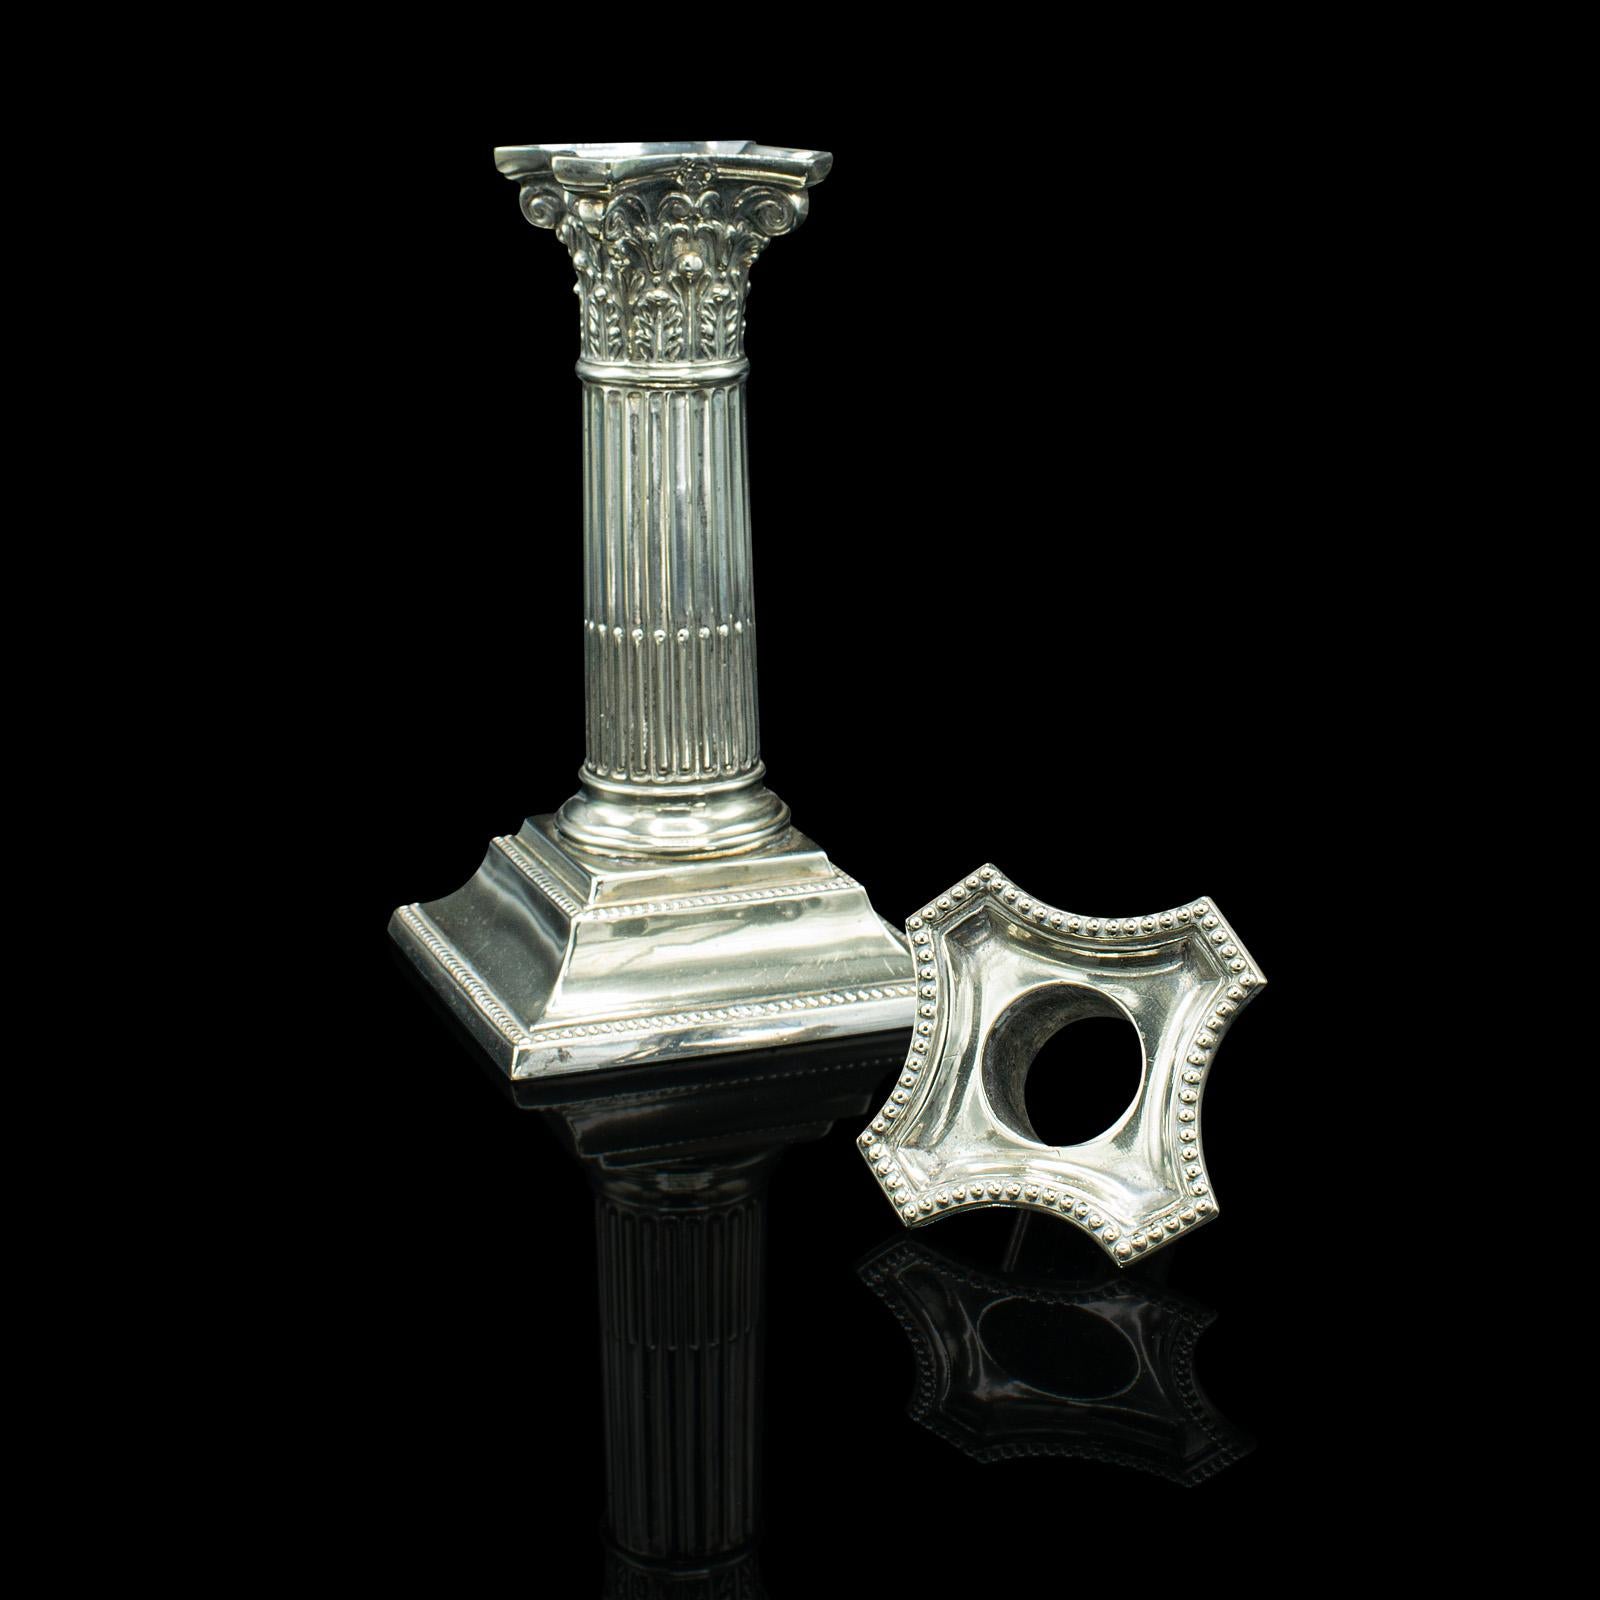 19th Century Pair of Antique Decorative Candlesticks, Italian, Silver Plate, Grand Tour, 1860 For Sale